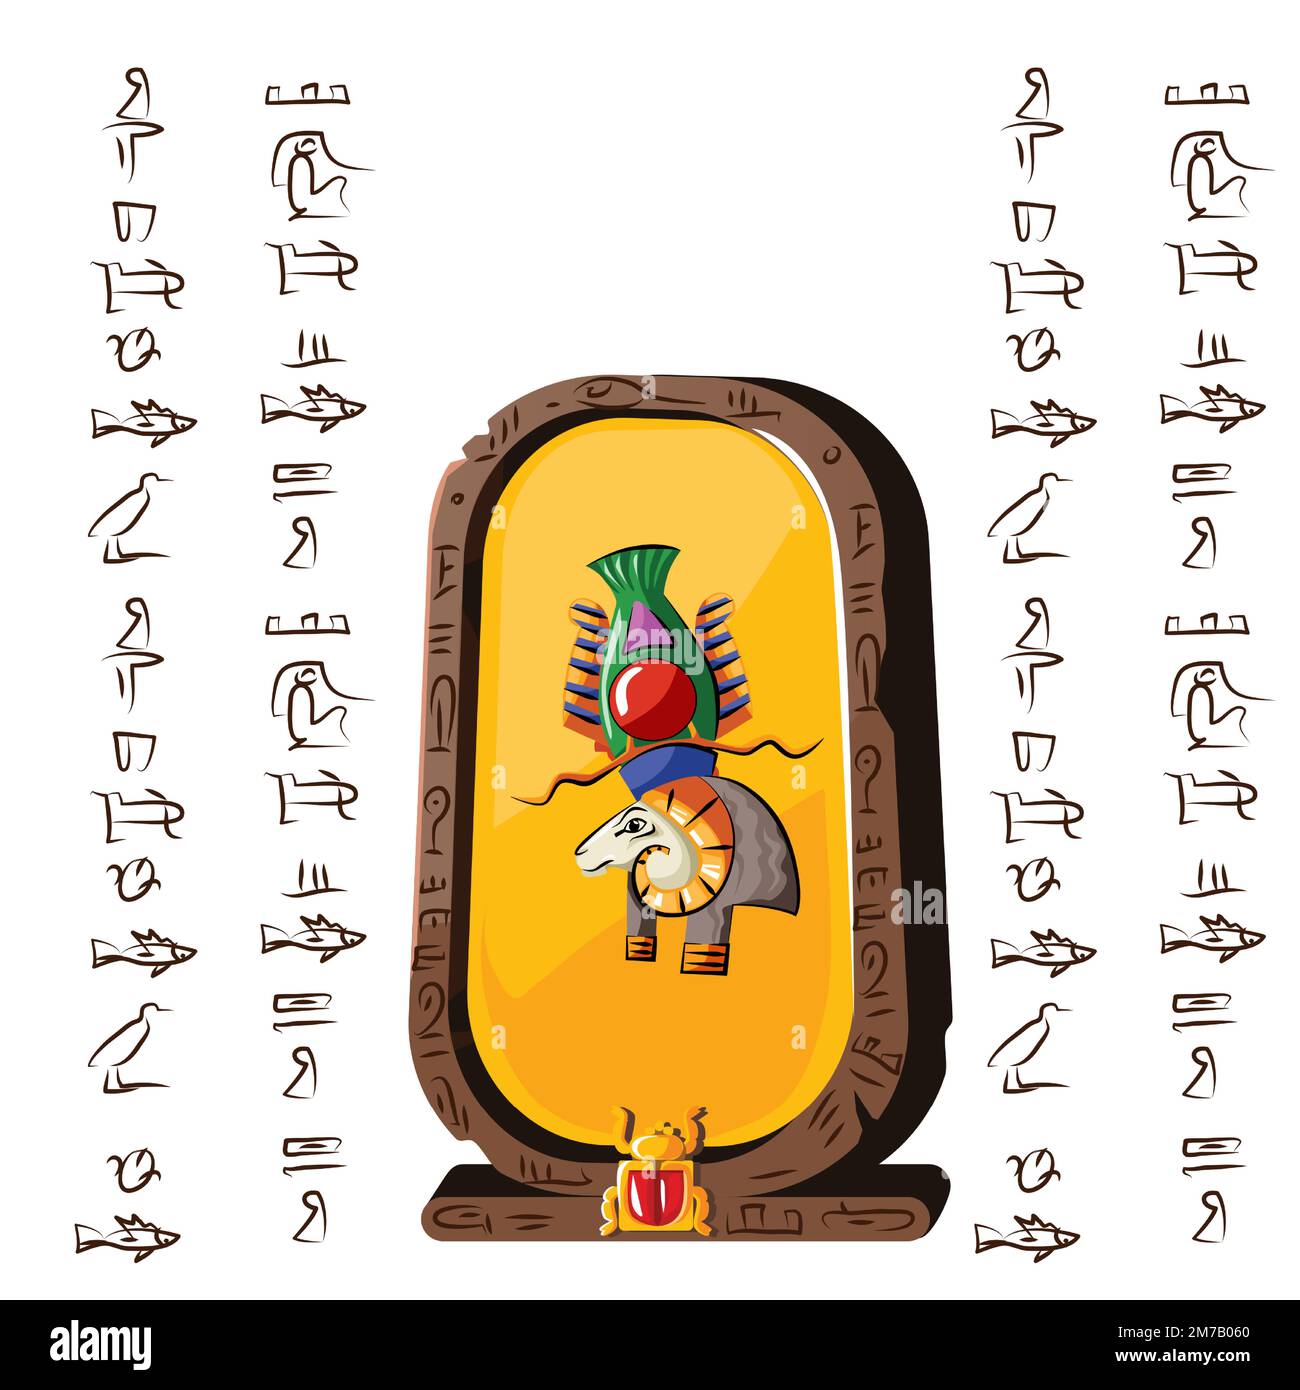 Stone board or clay plate with ram headed god and Egyptian hieroglyphs cartoon vector illustration. Ancient object for recording storing information, graphical user interface for game design on white Stock Vector